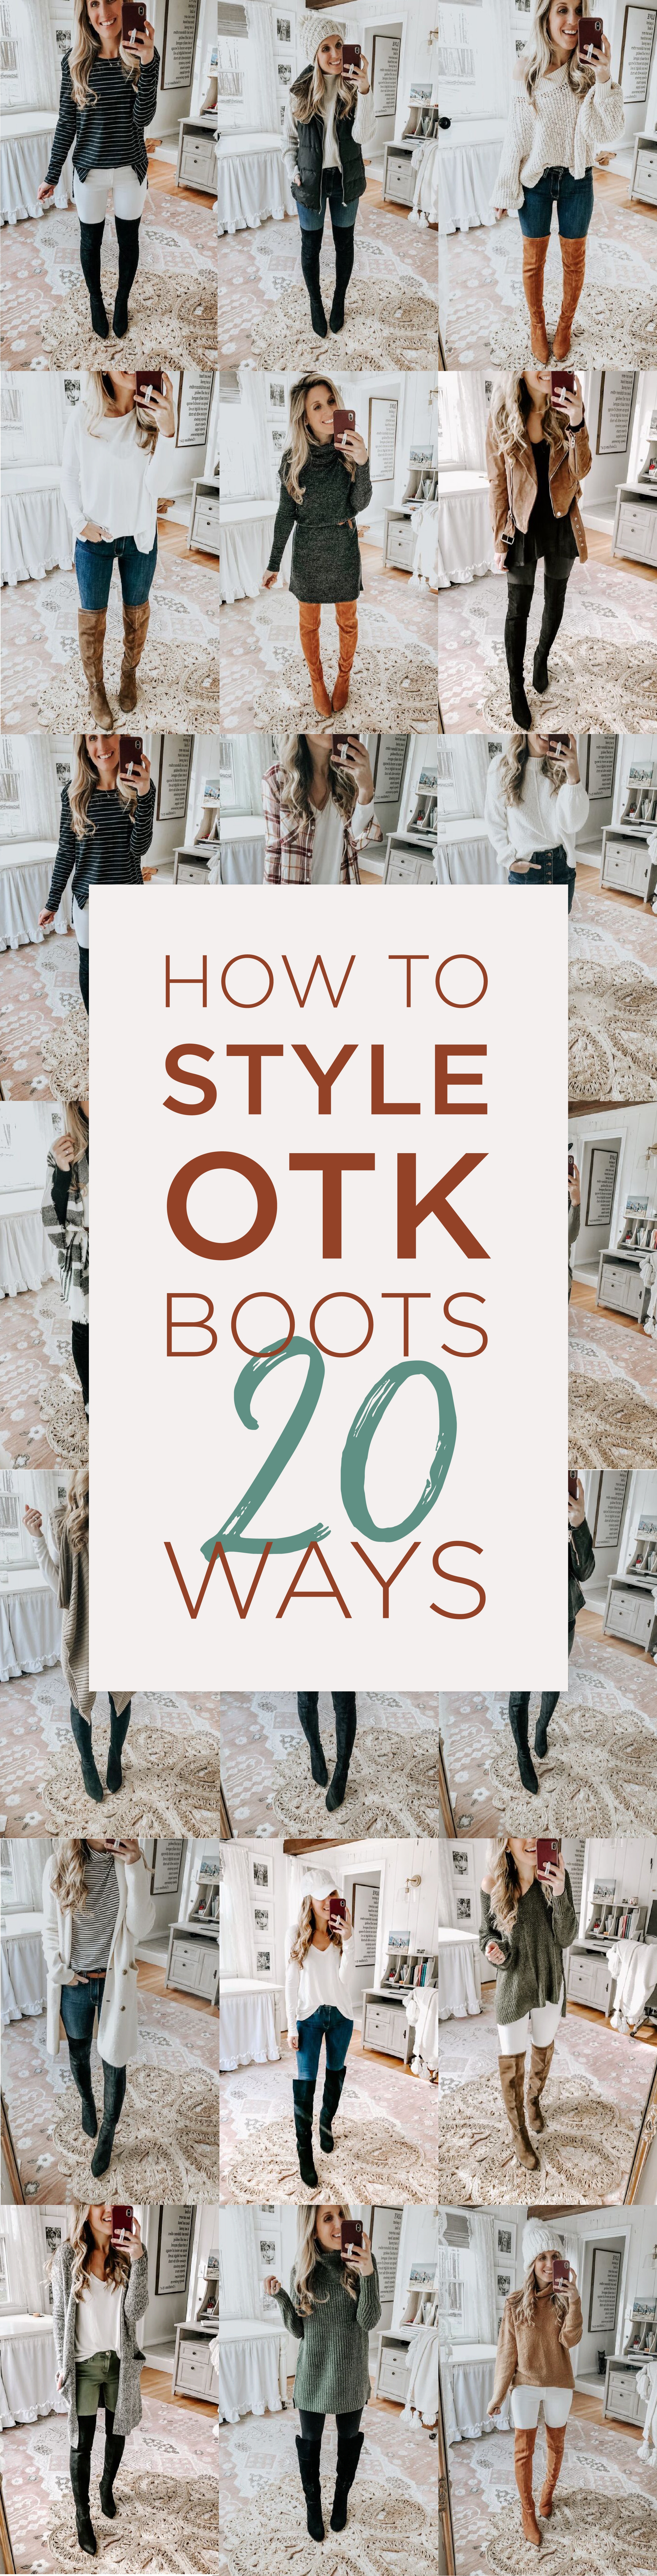 Motherhood blogger, Lynzy & Co. Shows us How to Style OTK Boots 20 Ways including date night and work appropriate outfits!